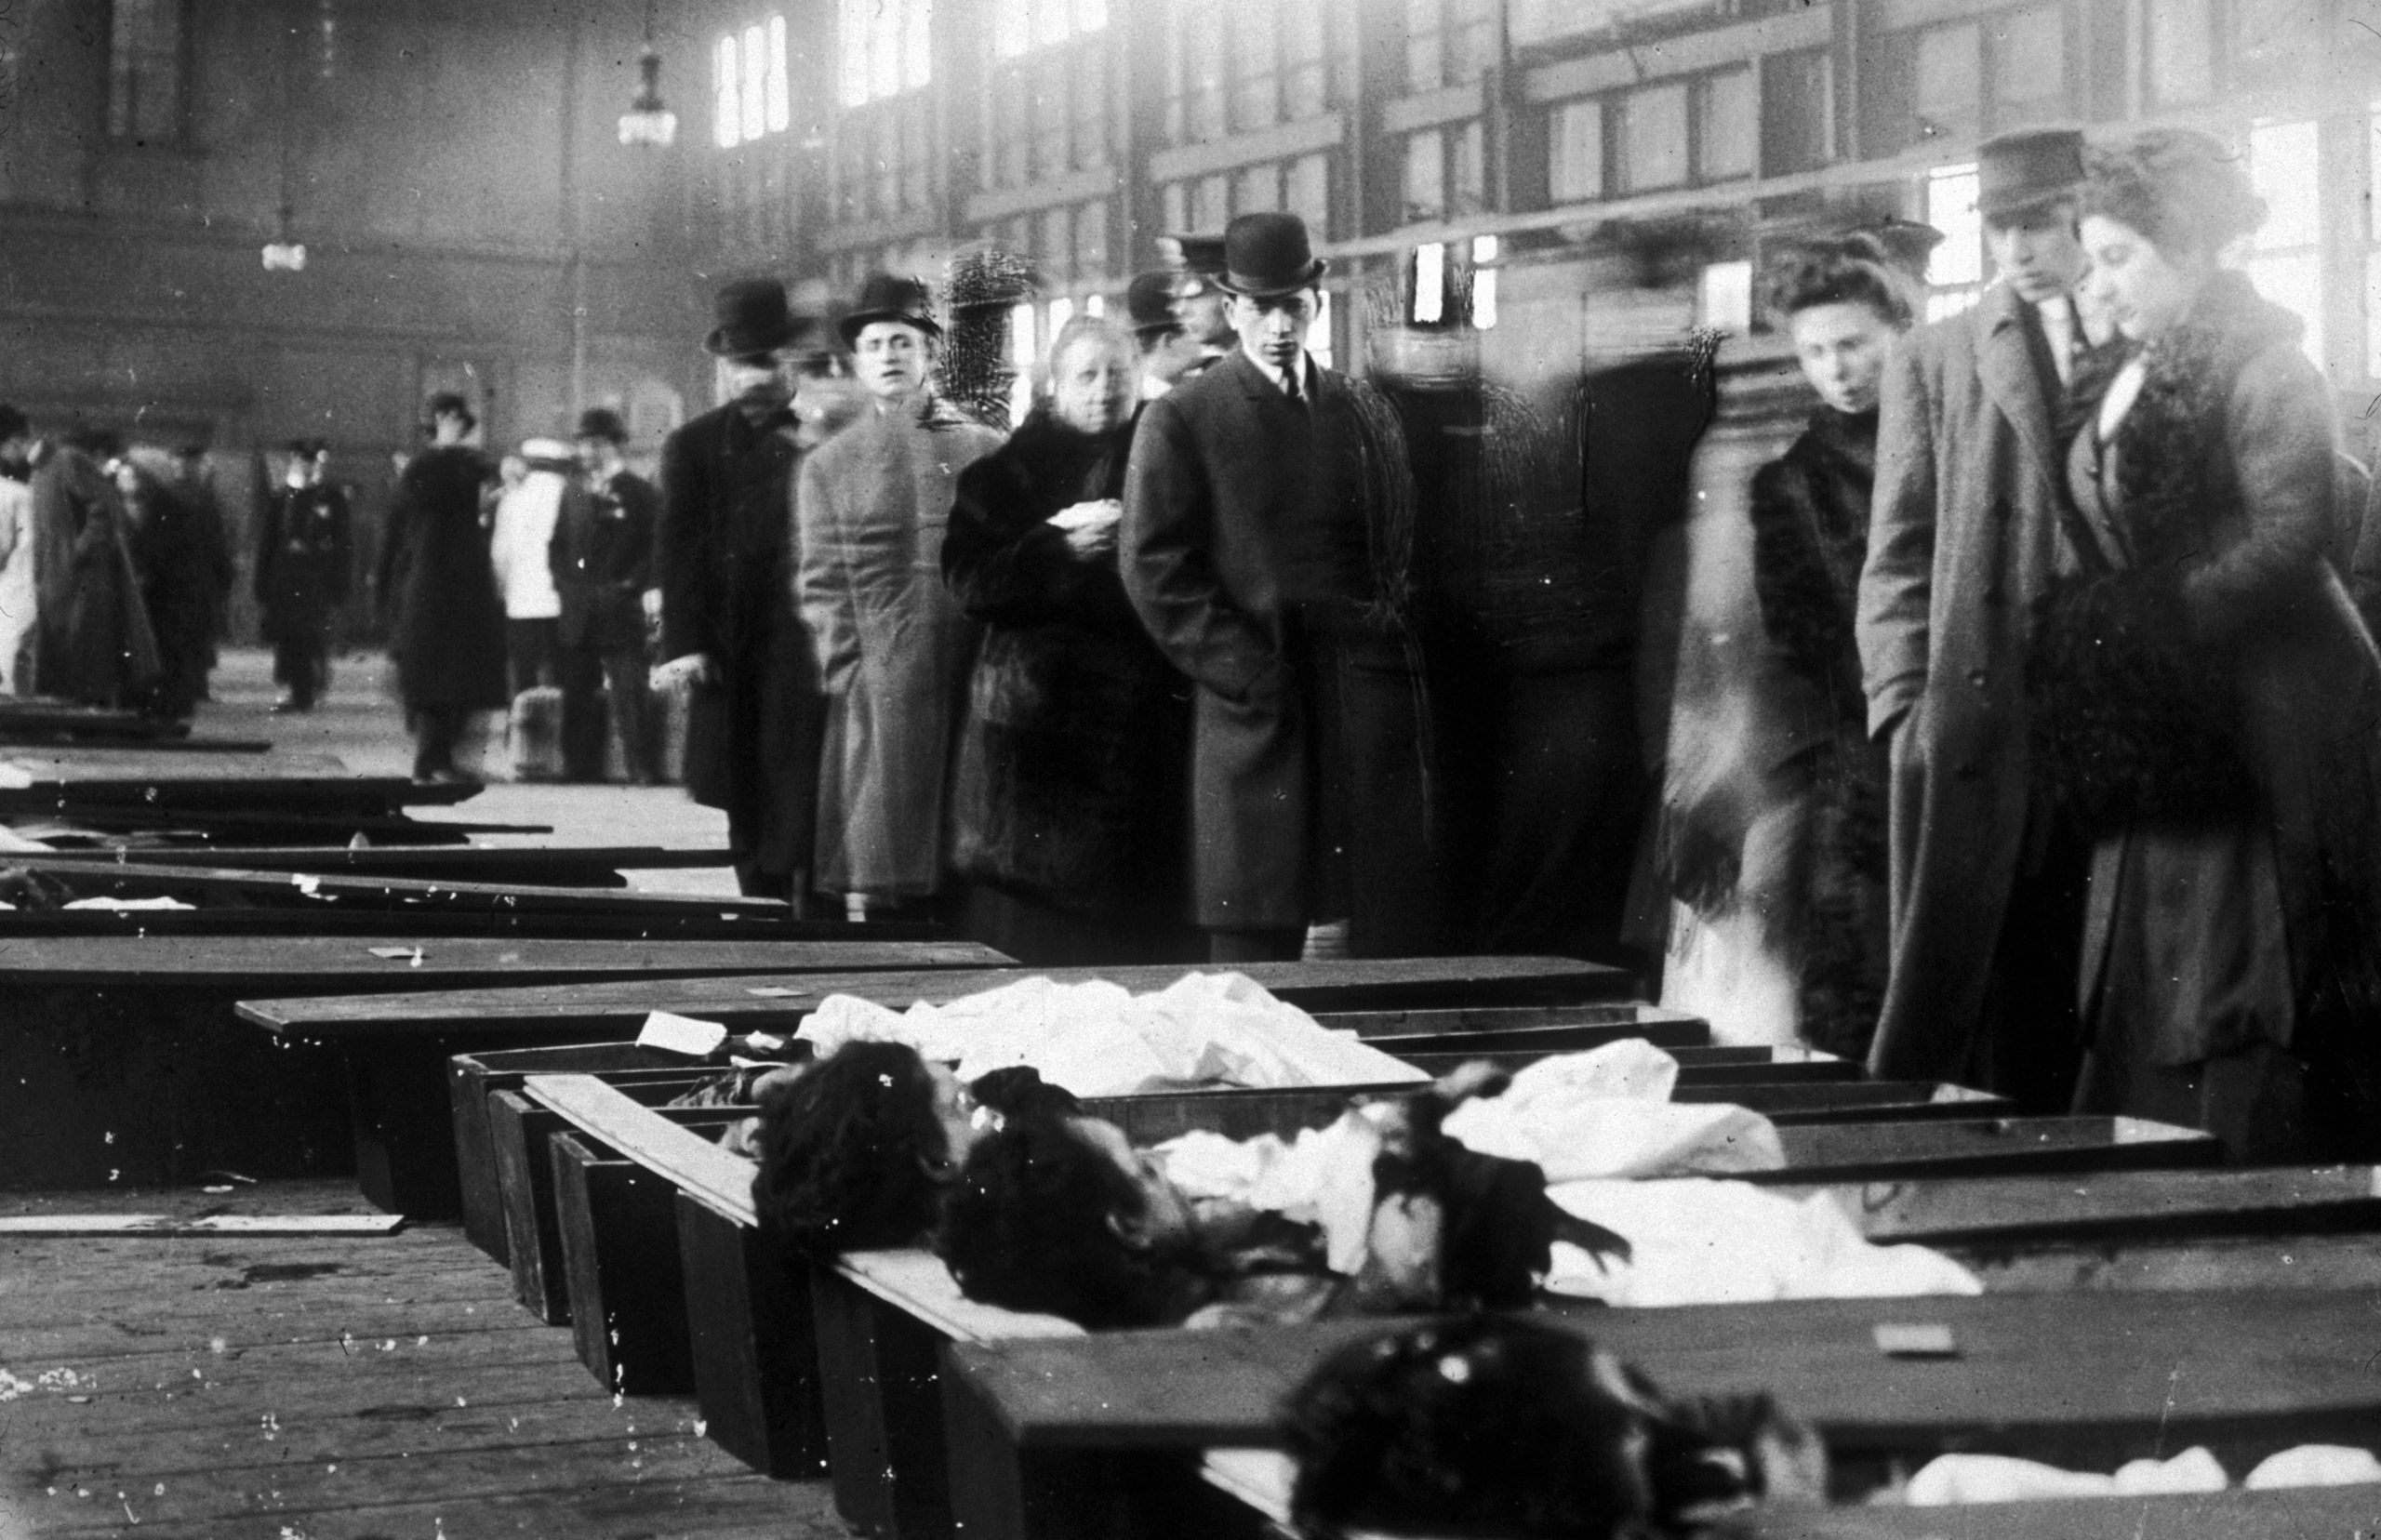 People line up to identify the bodies of victims after a fire at the Triangle Shirtwaist Company in New York, March 25, 1911.